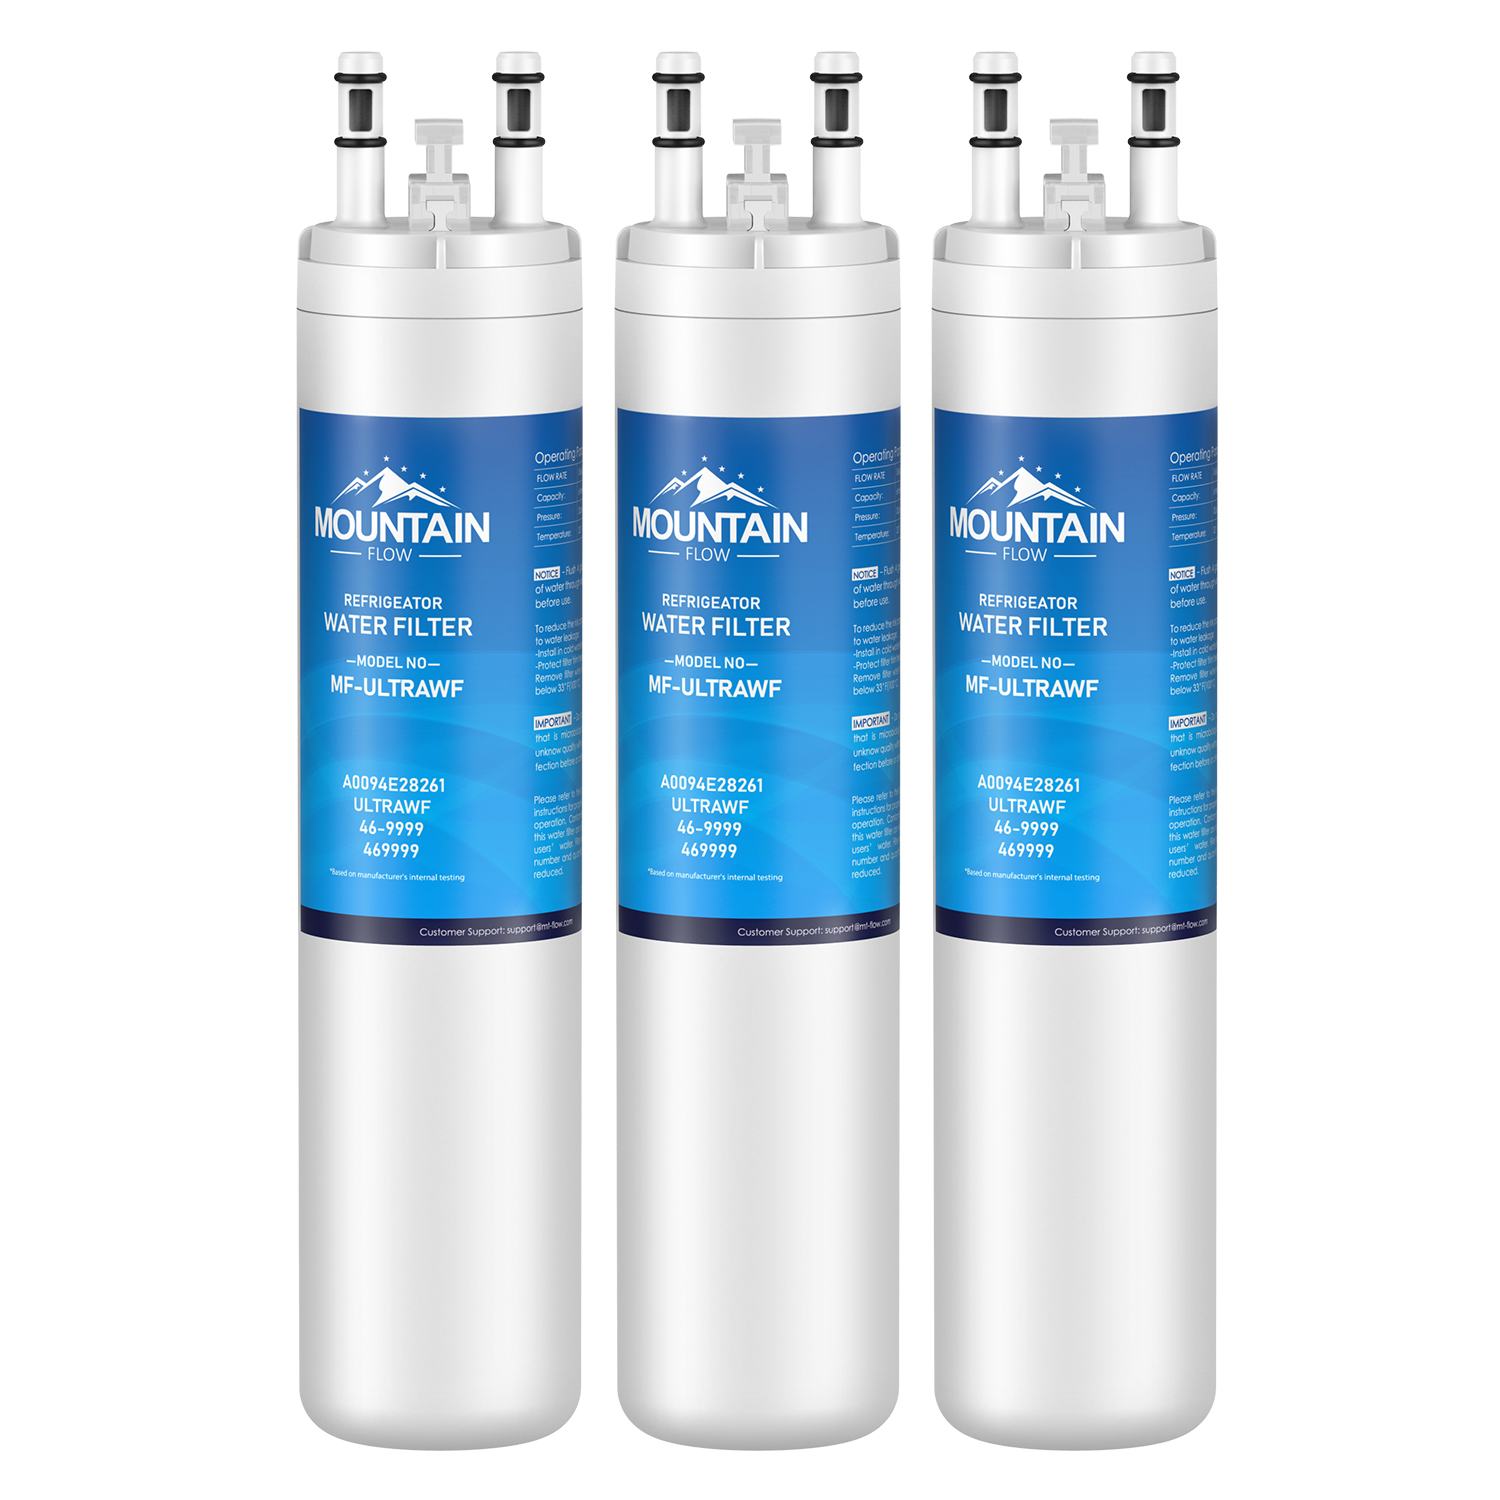 ULTRAWF Replacement for PureSource Ultra, 46-9999 Water Filter, 3Packs